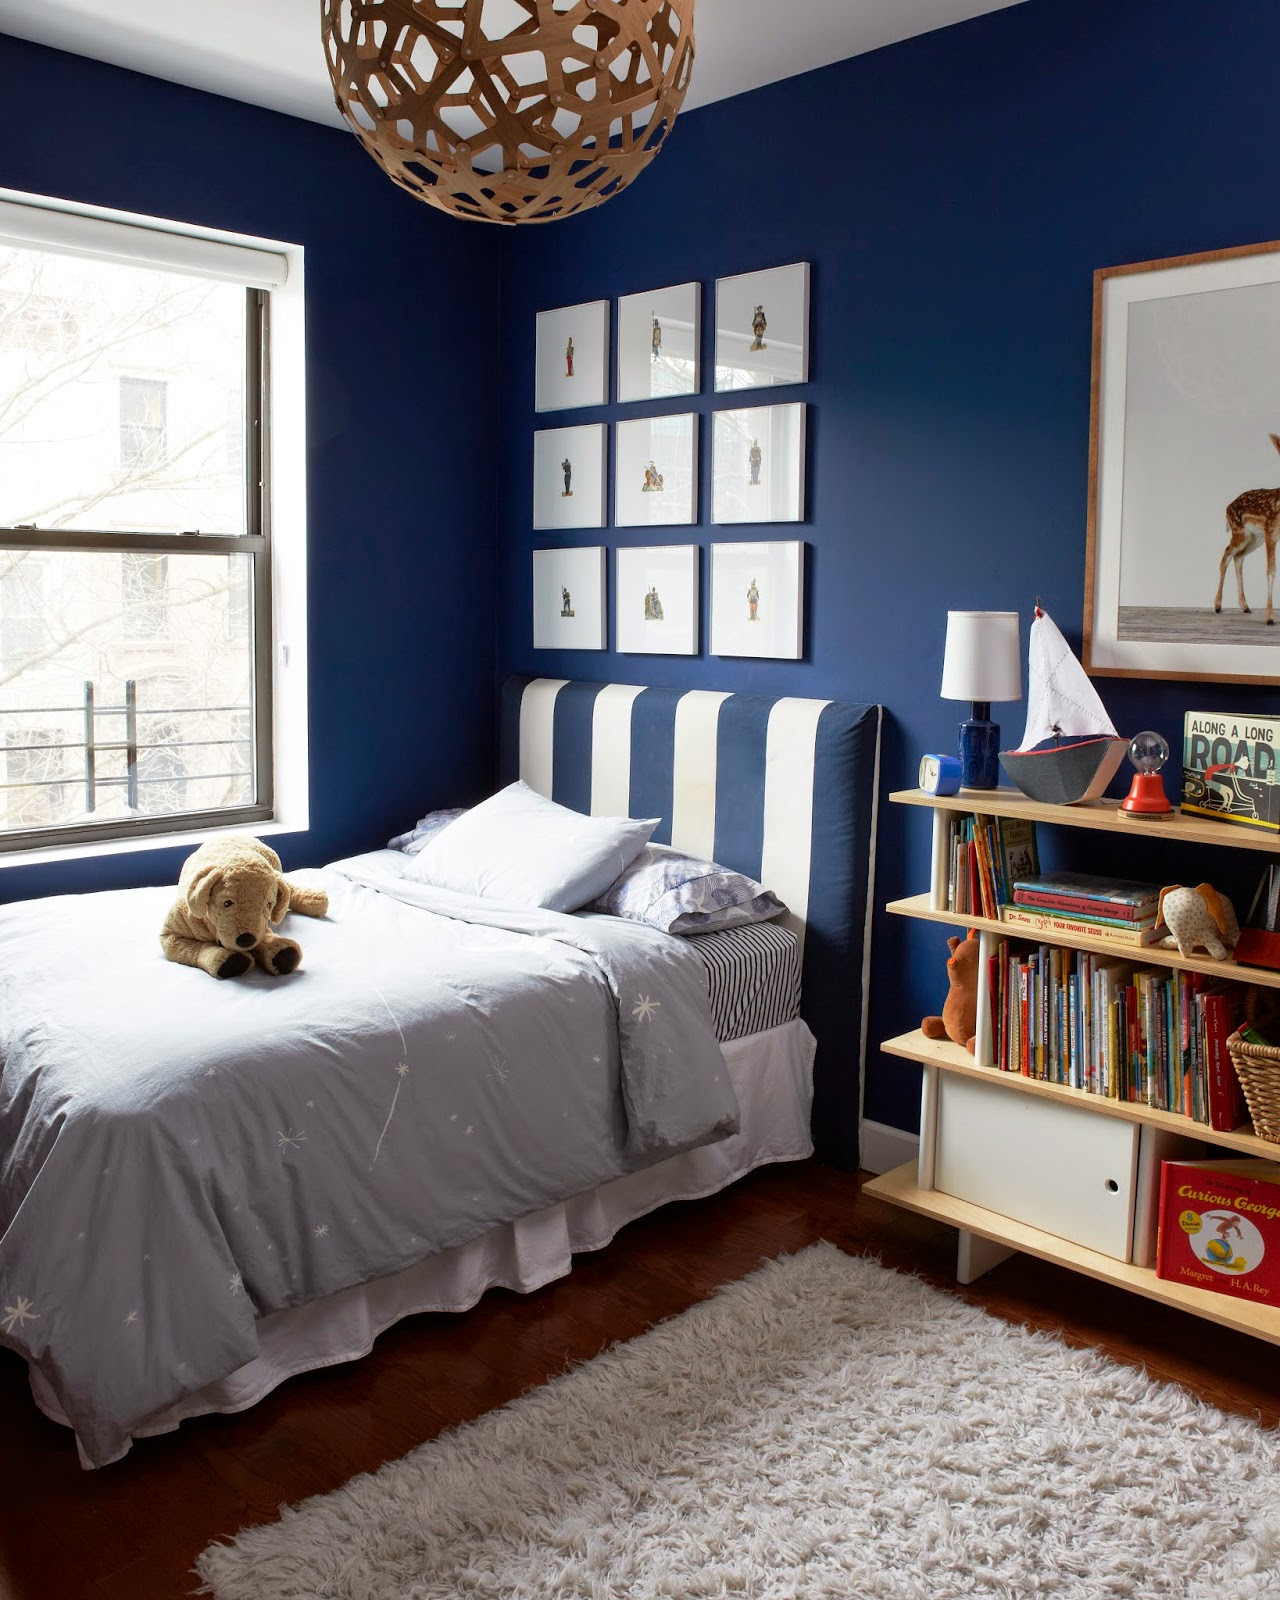 Bedroom Paint Color
 Help Which Bedroom Paint Color Would You Choose